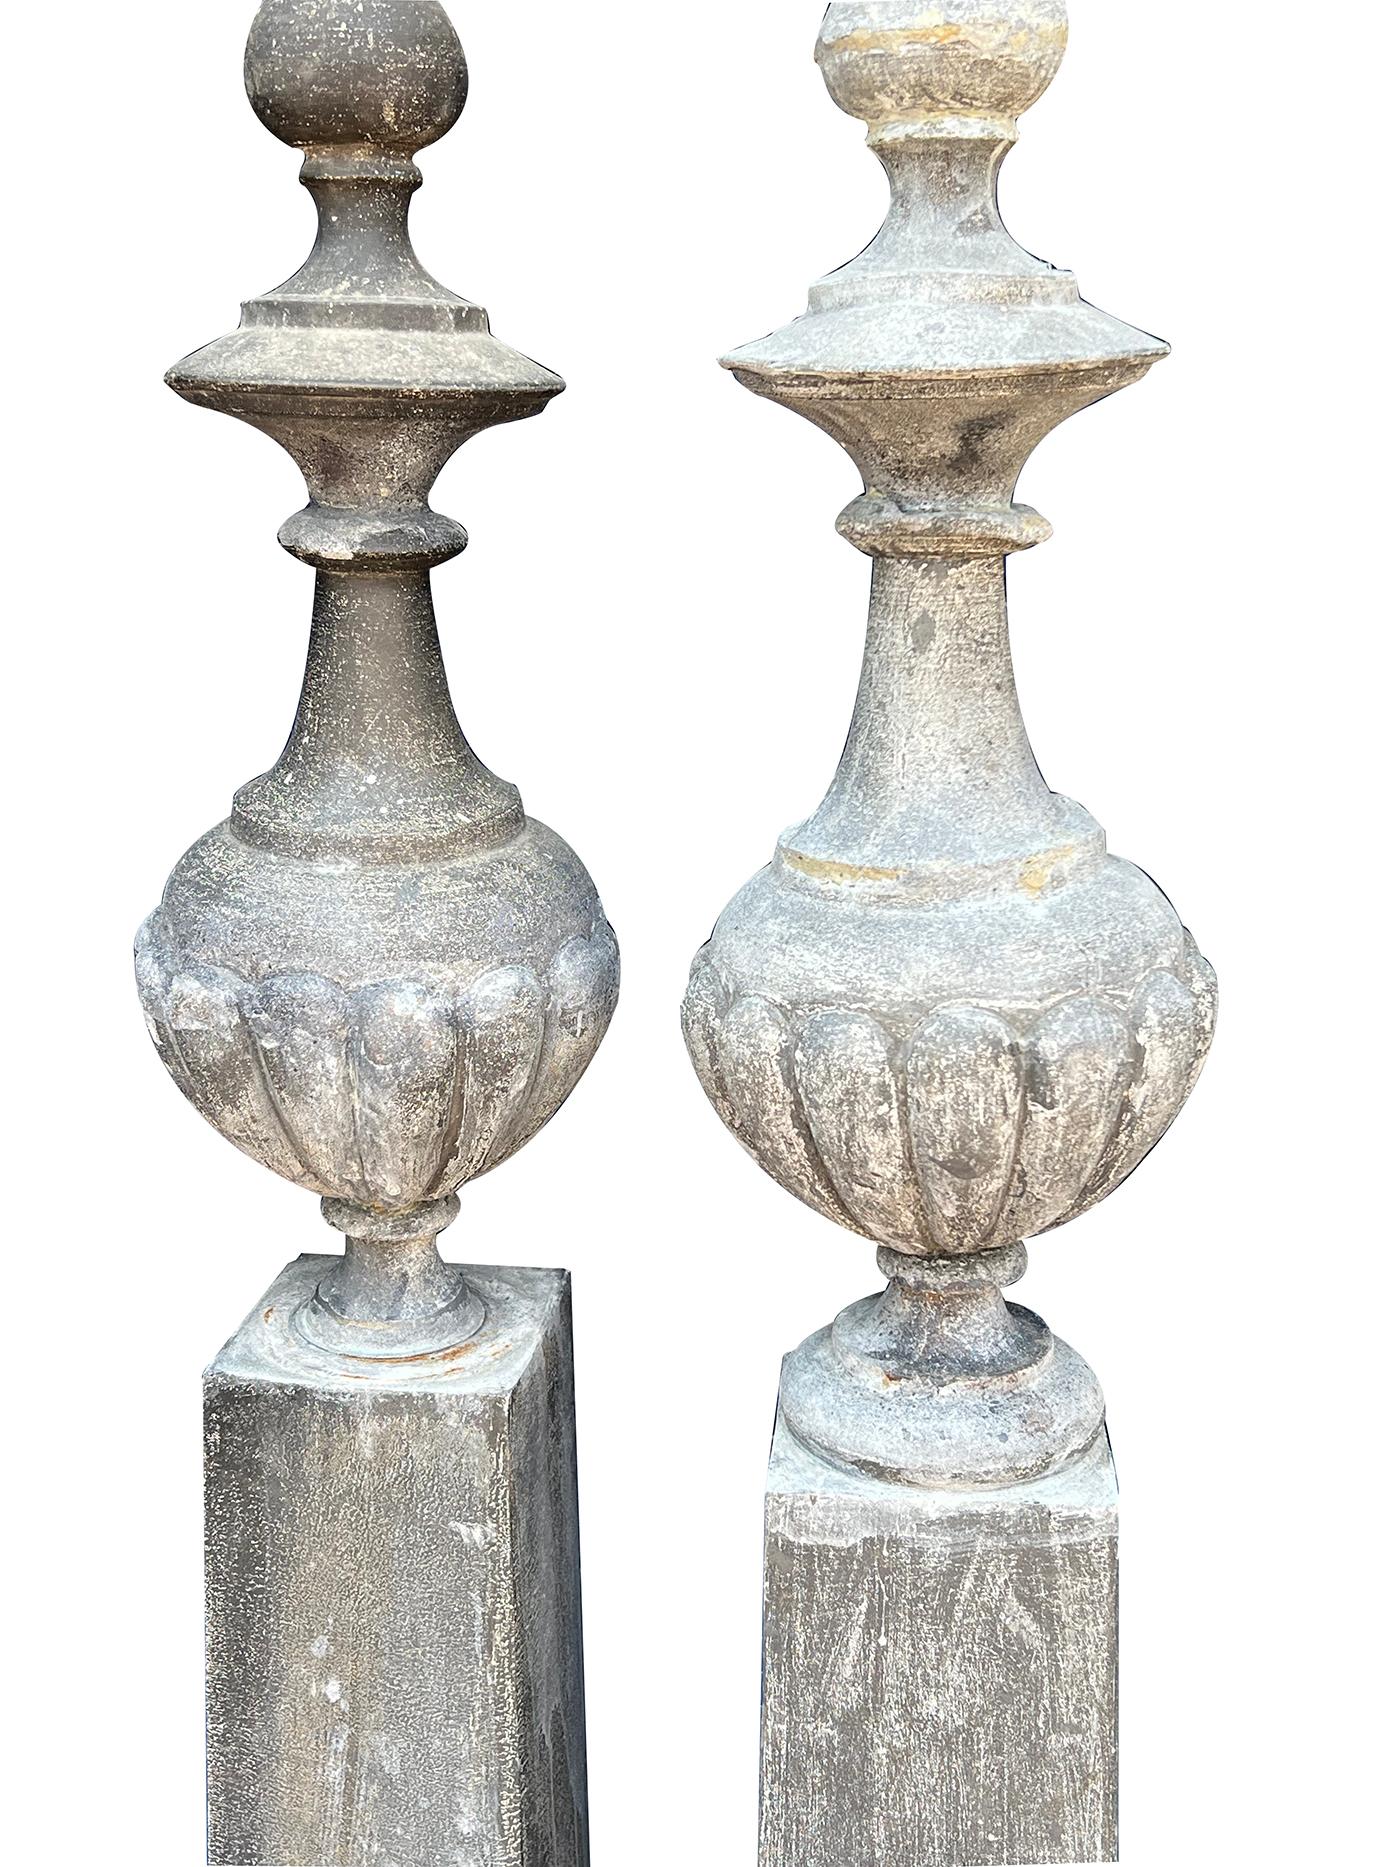 Molded Stately and Tall Pair of French Napoleon III Zinc Roof Finials For Sale